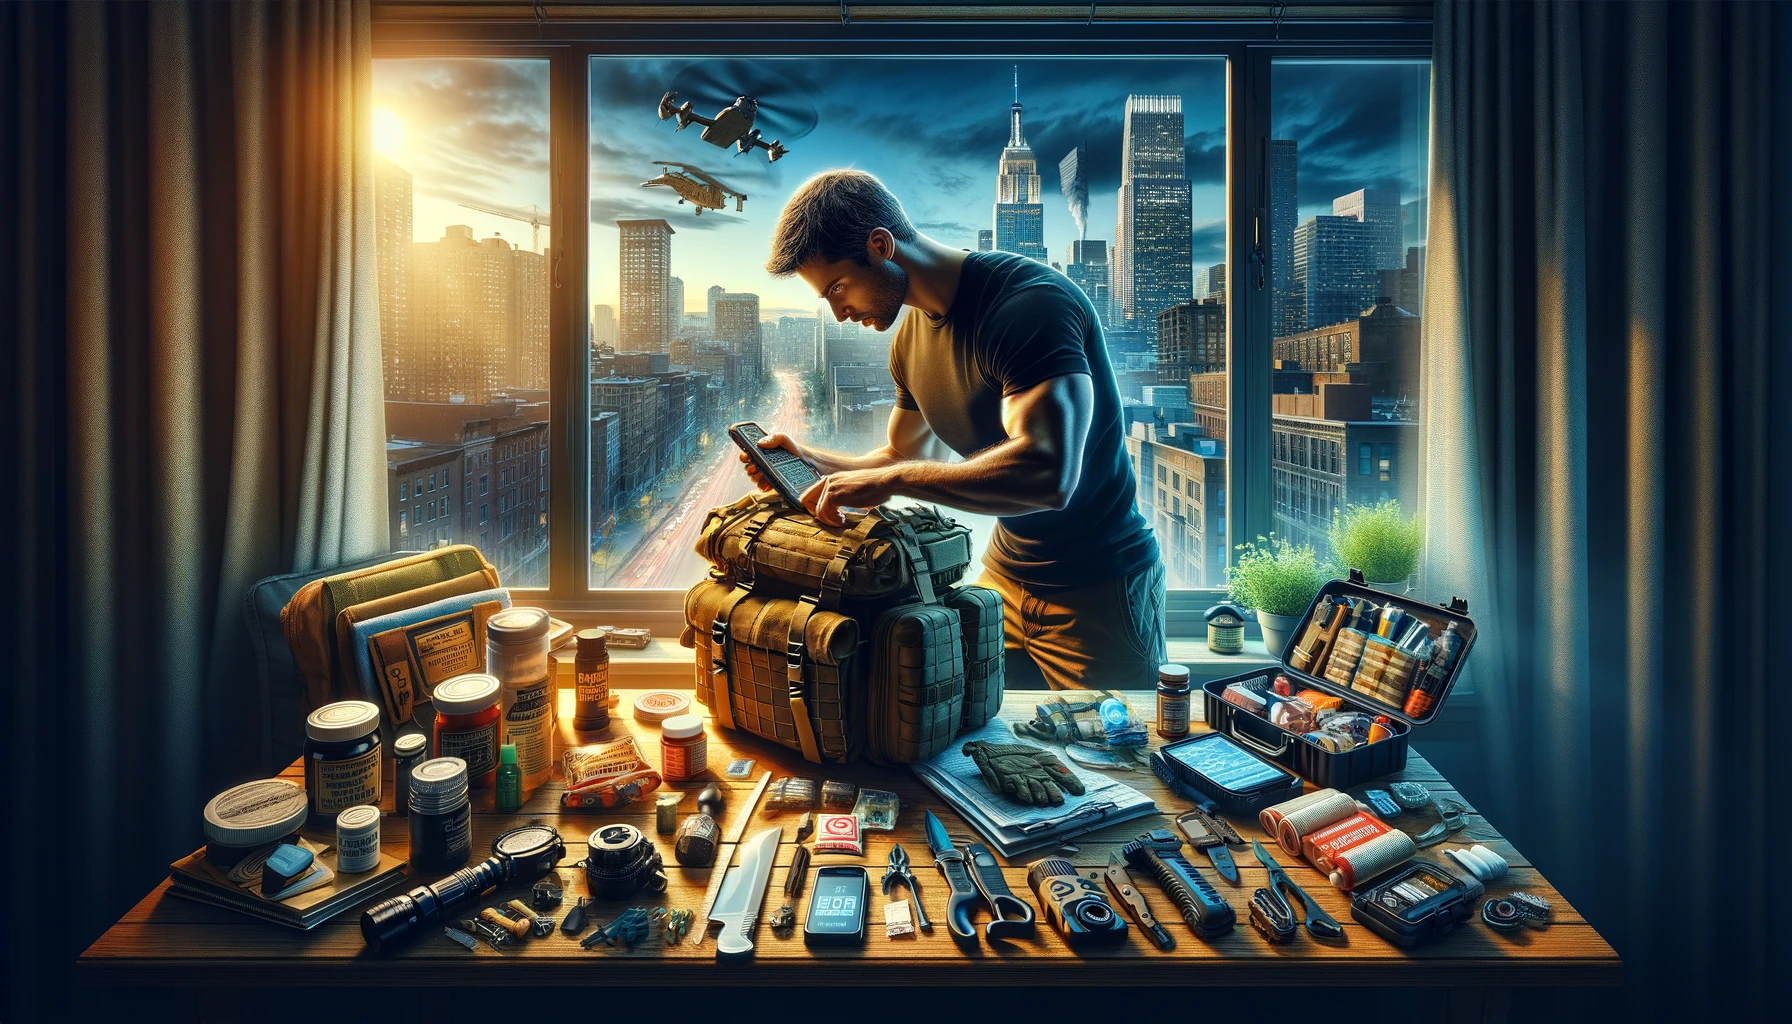 Urban prepper assembling a survival kit in an apartment, with essential items for urban emergencies, against a cityscape backdrop